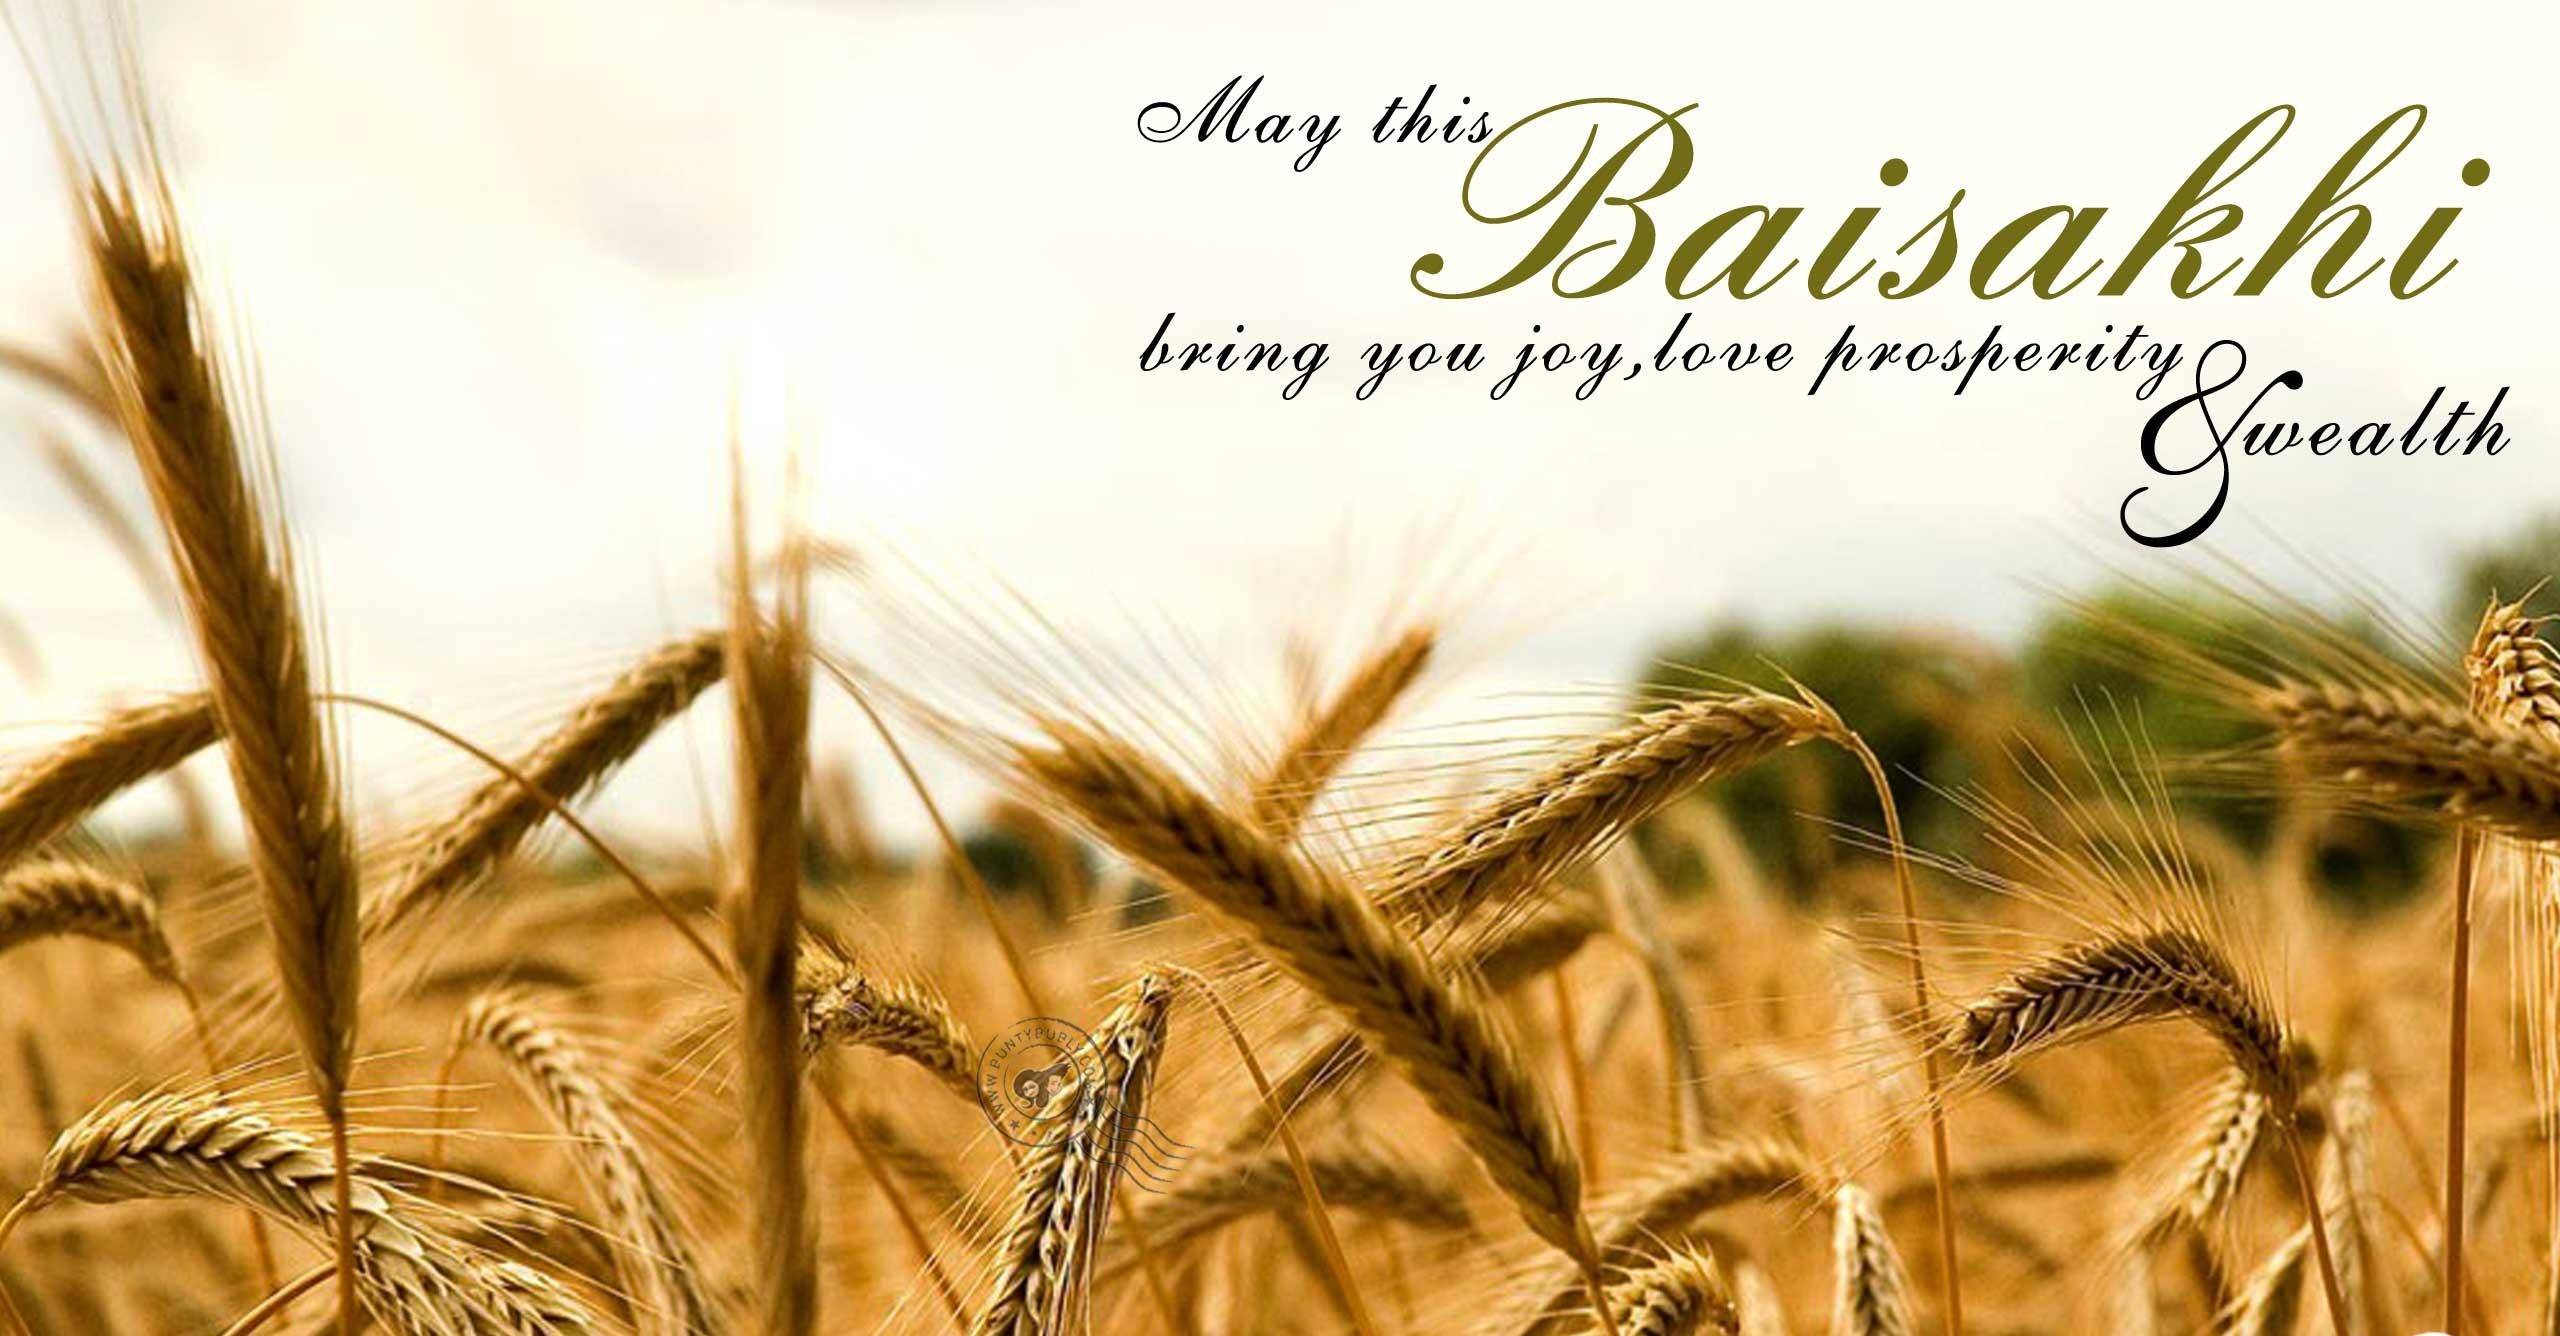 Happy Baisakhi Images, Wallpapers & Photos for Whatsapp & Facebook 2017